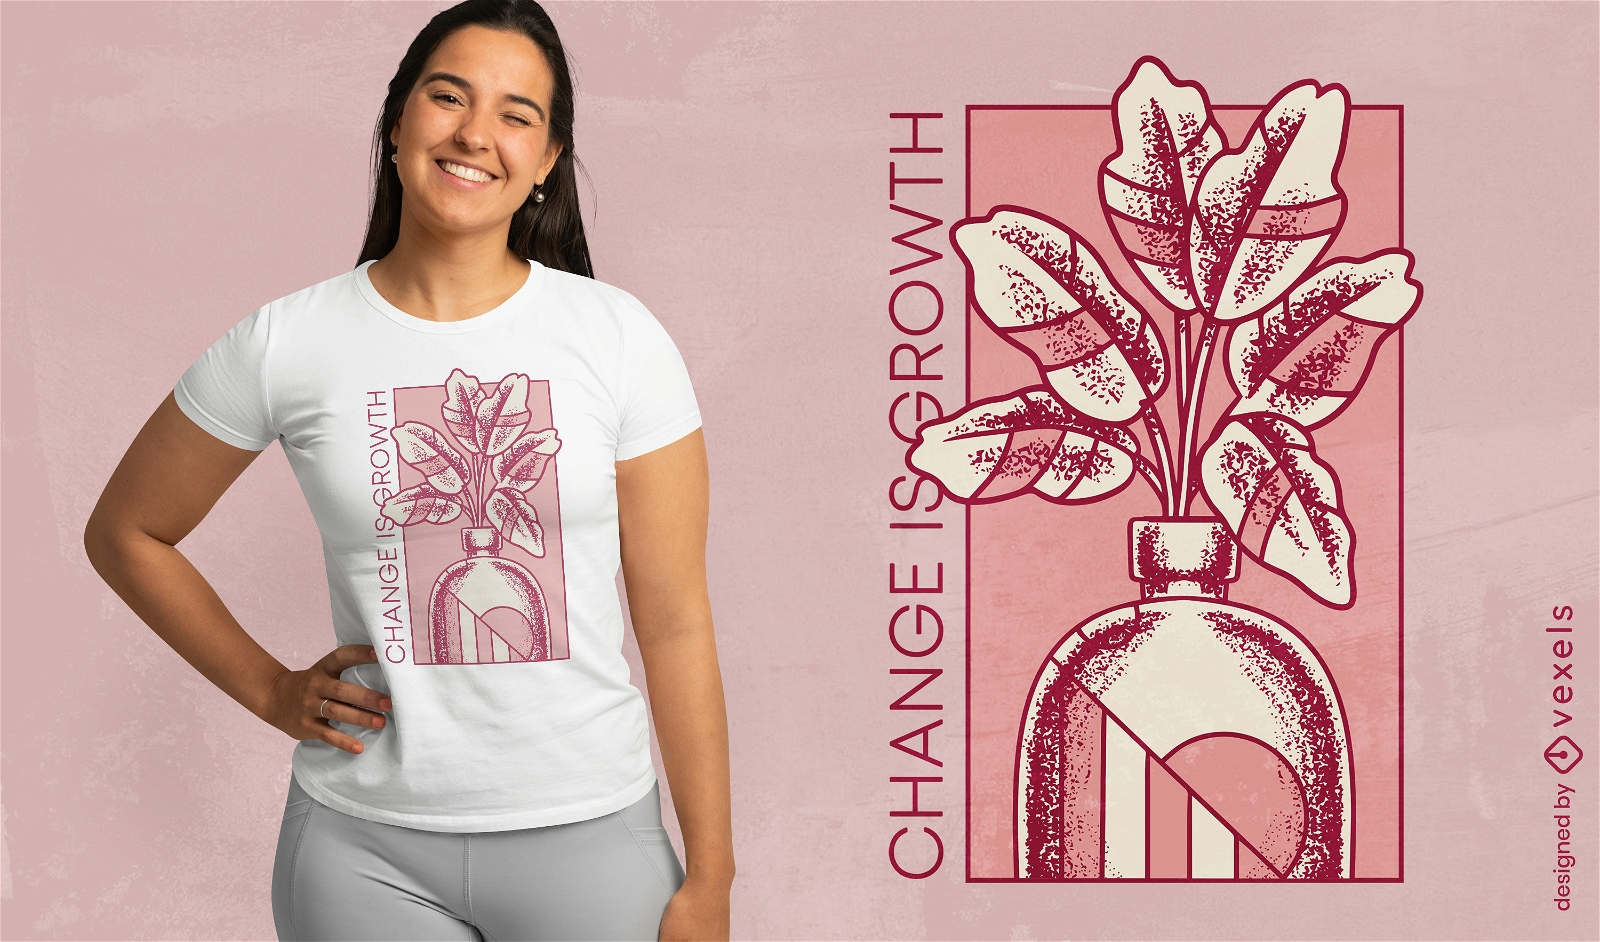 Growth quote flower t-shirt design